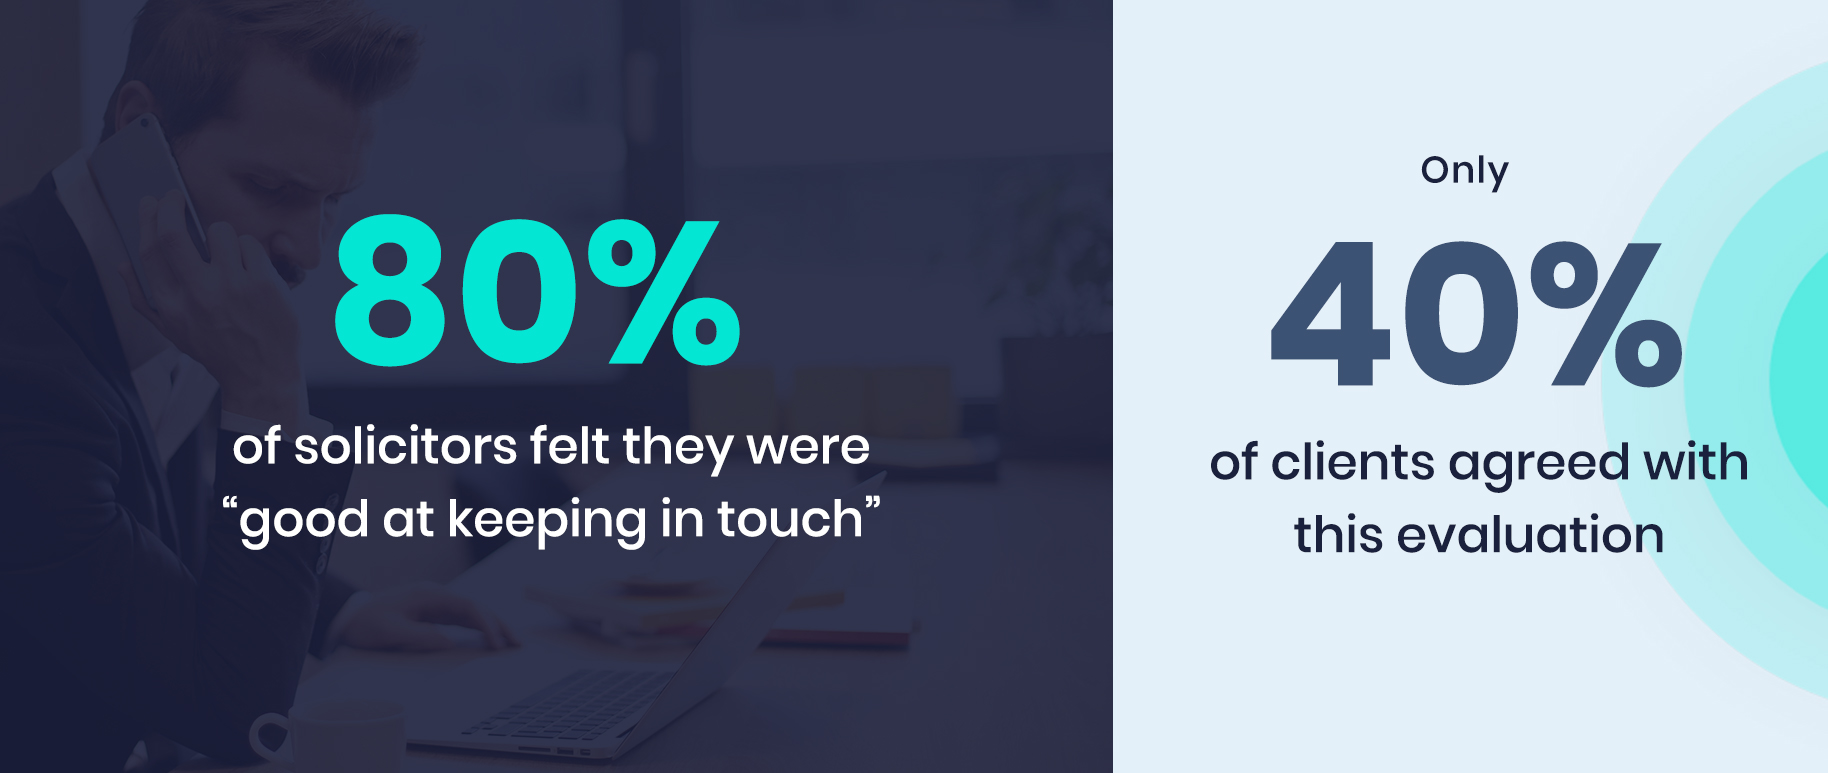 80% of solicitors and barristers felt they were “good at keeping in touch”, whilst only 40% of clients agreed with this evaluation